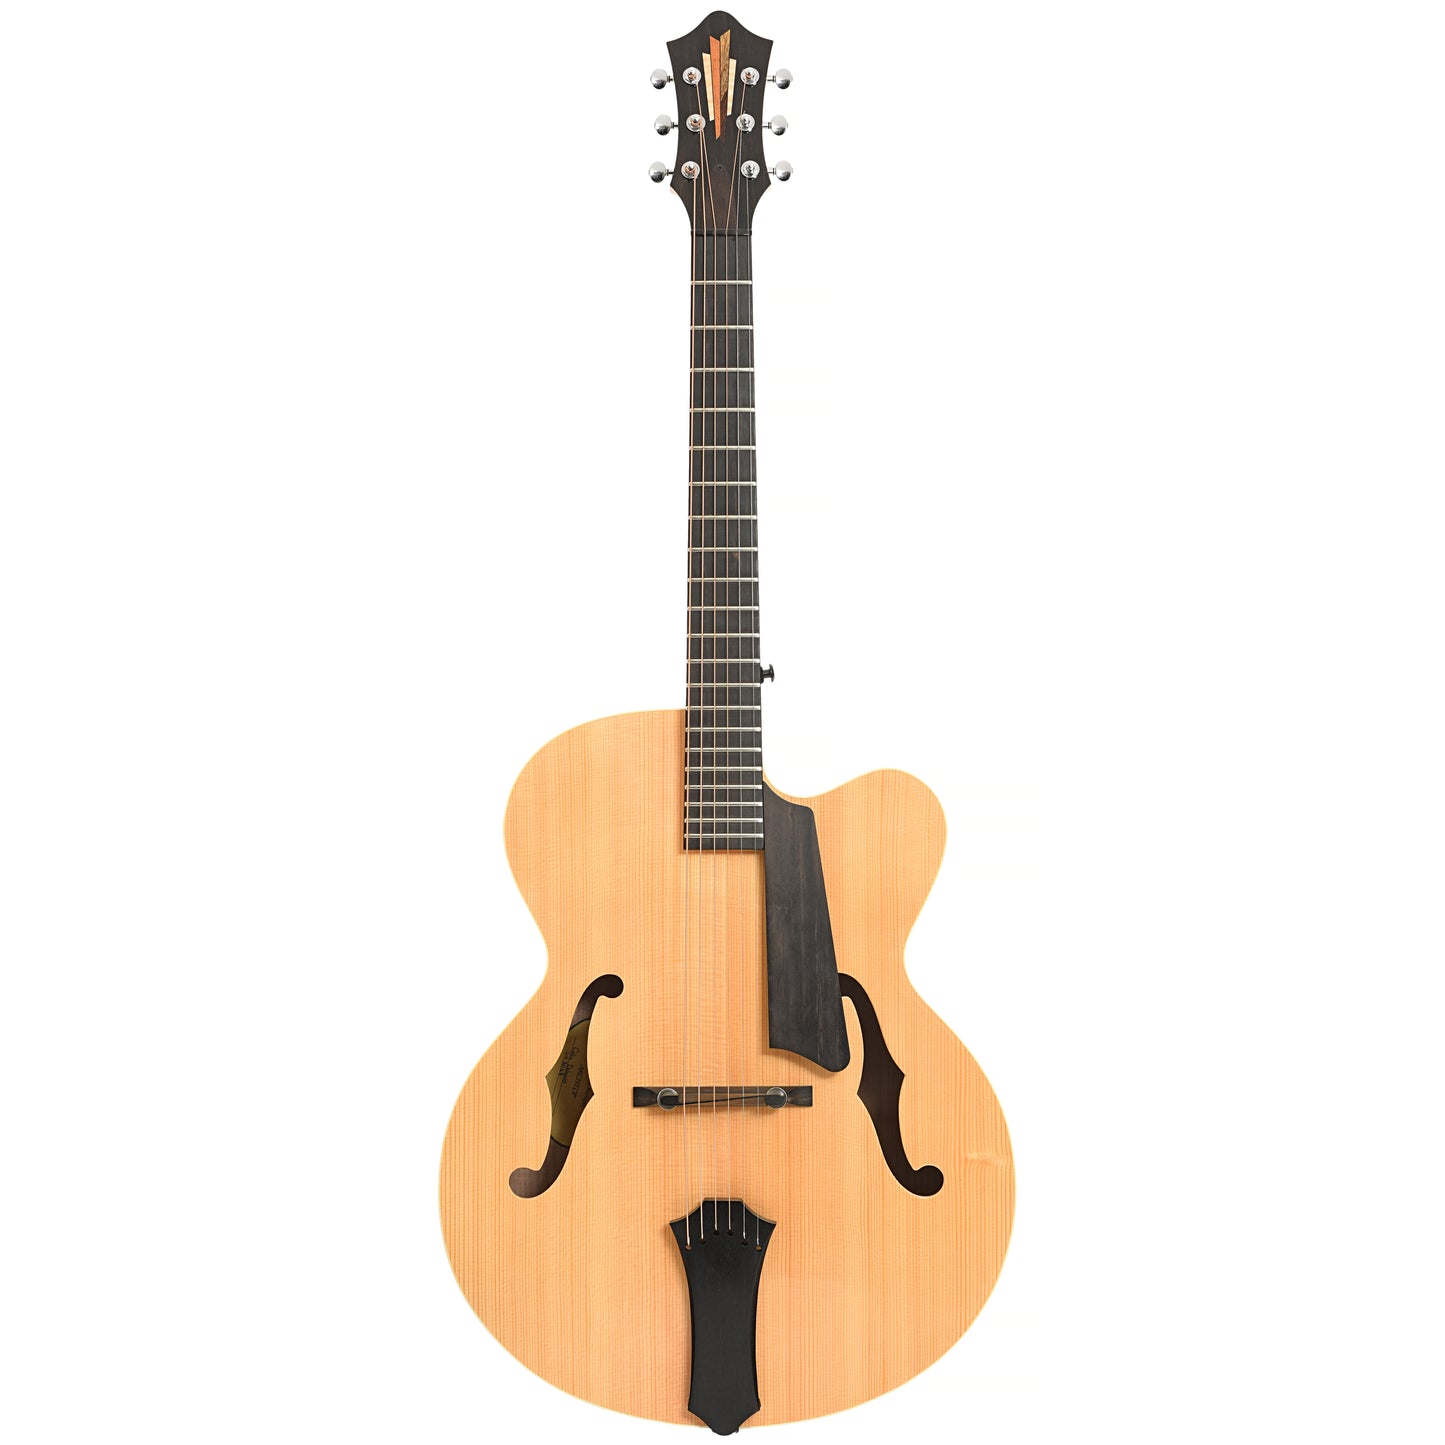 Full front of C. Dygard Gallup School Archtop Guitar (c.2014)